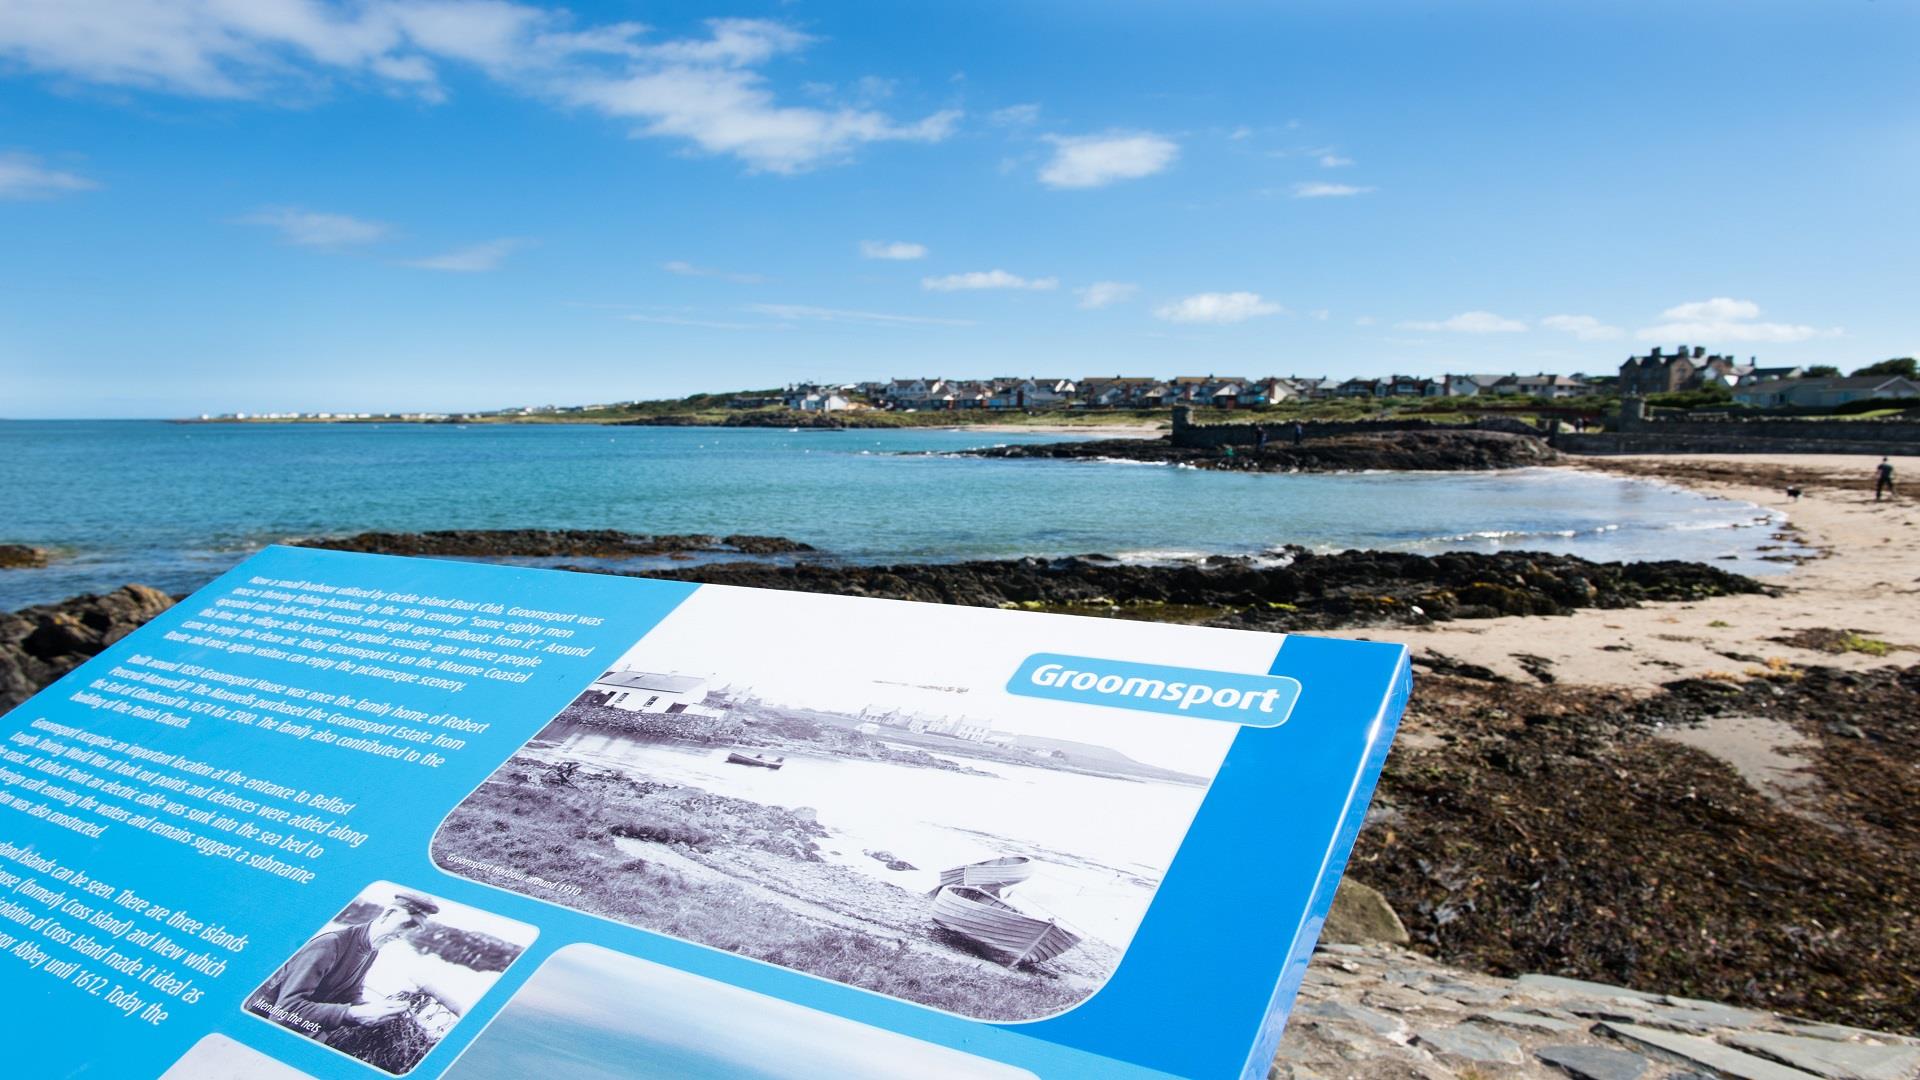 An image of the Groomsport Information sign